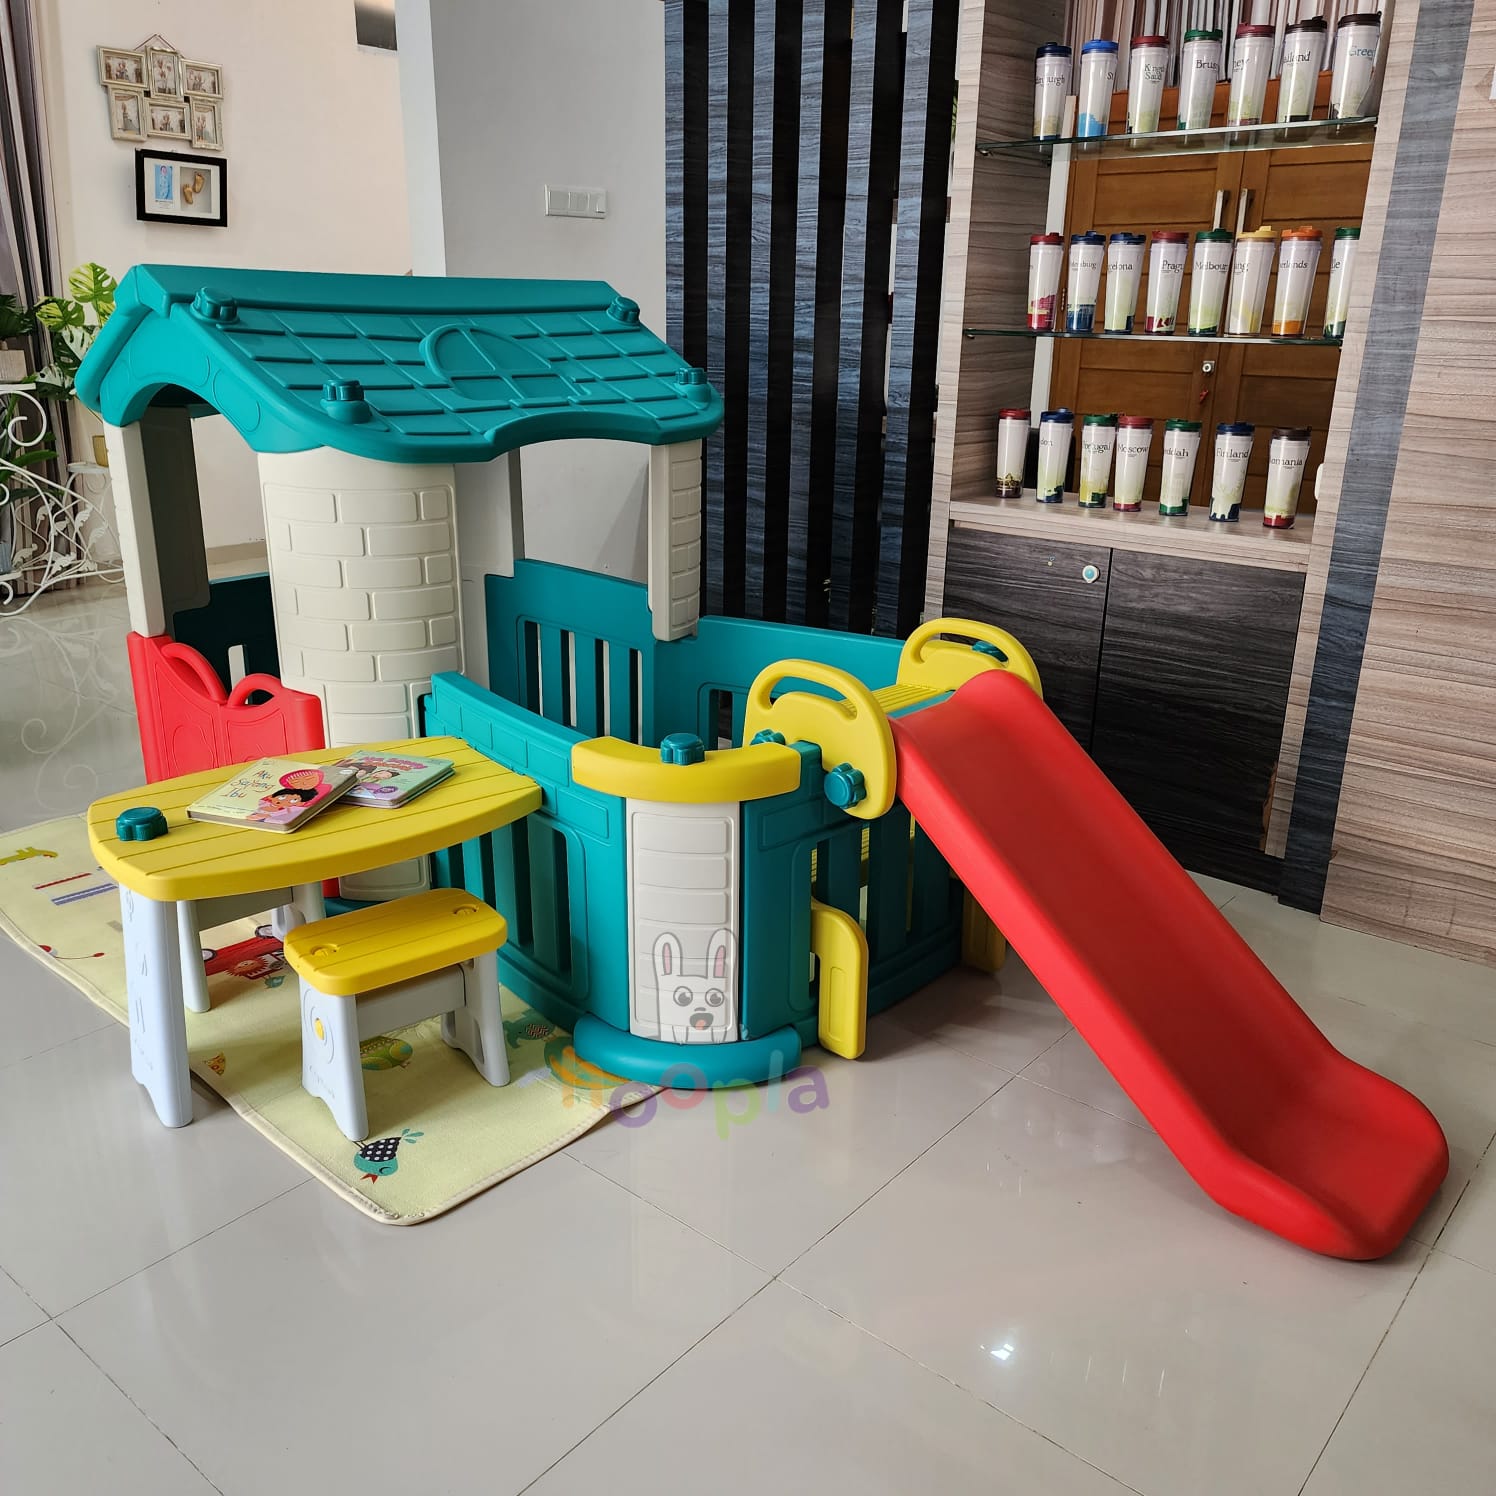 BIG HAPPY PLAYHOUSE WITH 2PLAY ACTIVITIES